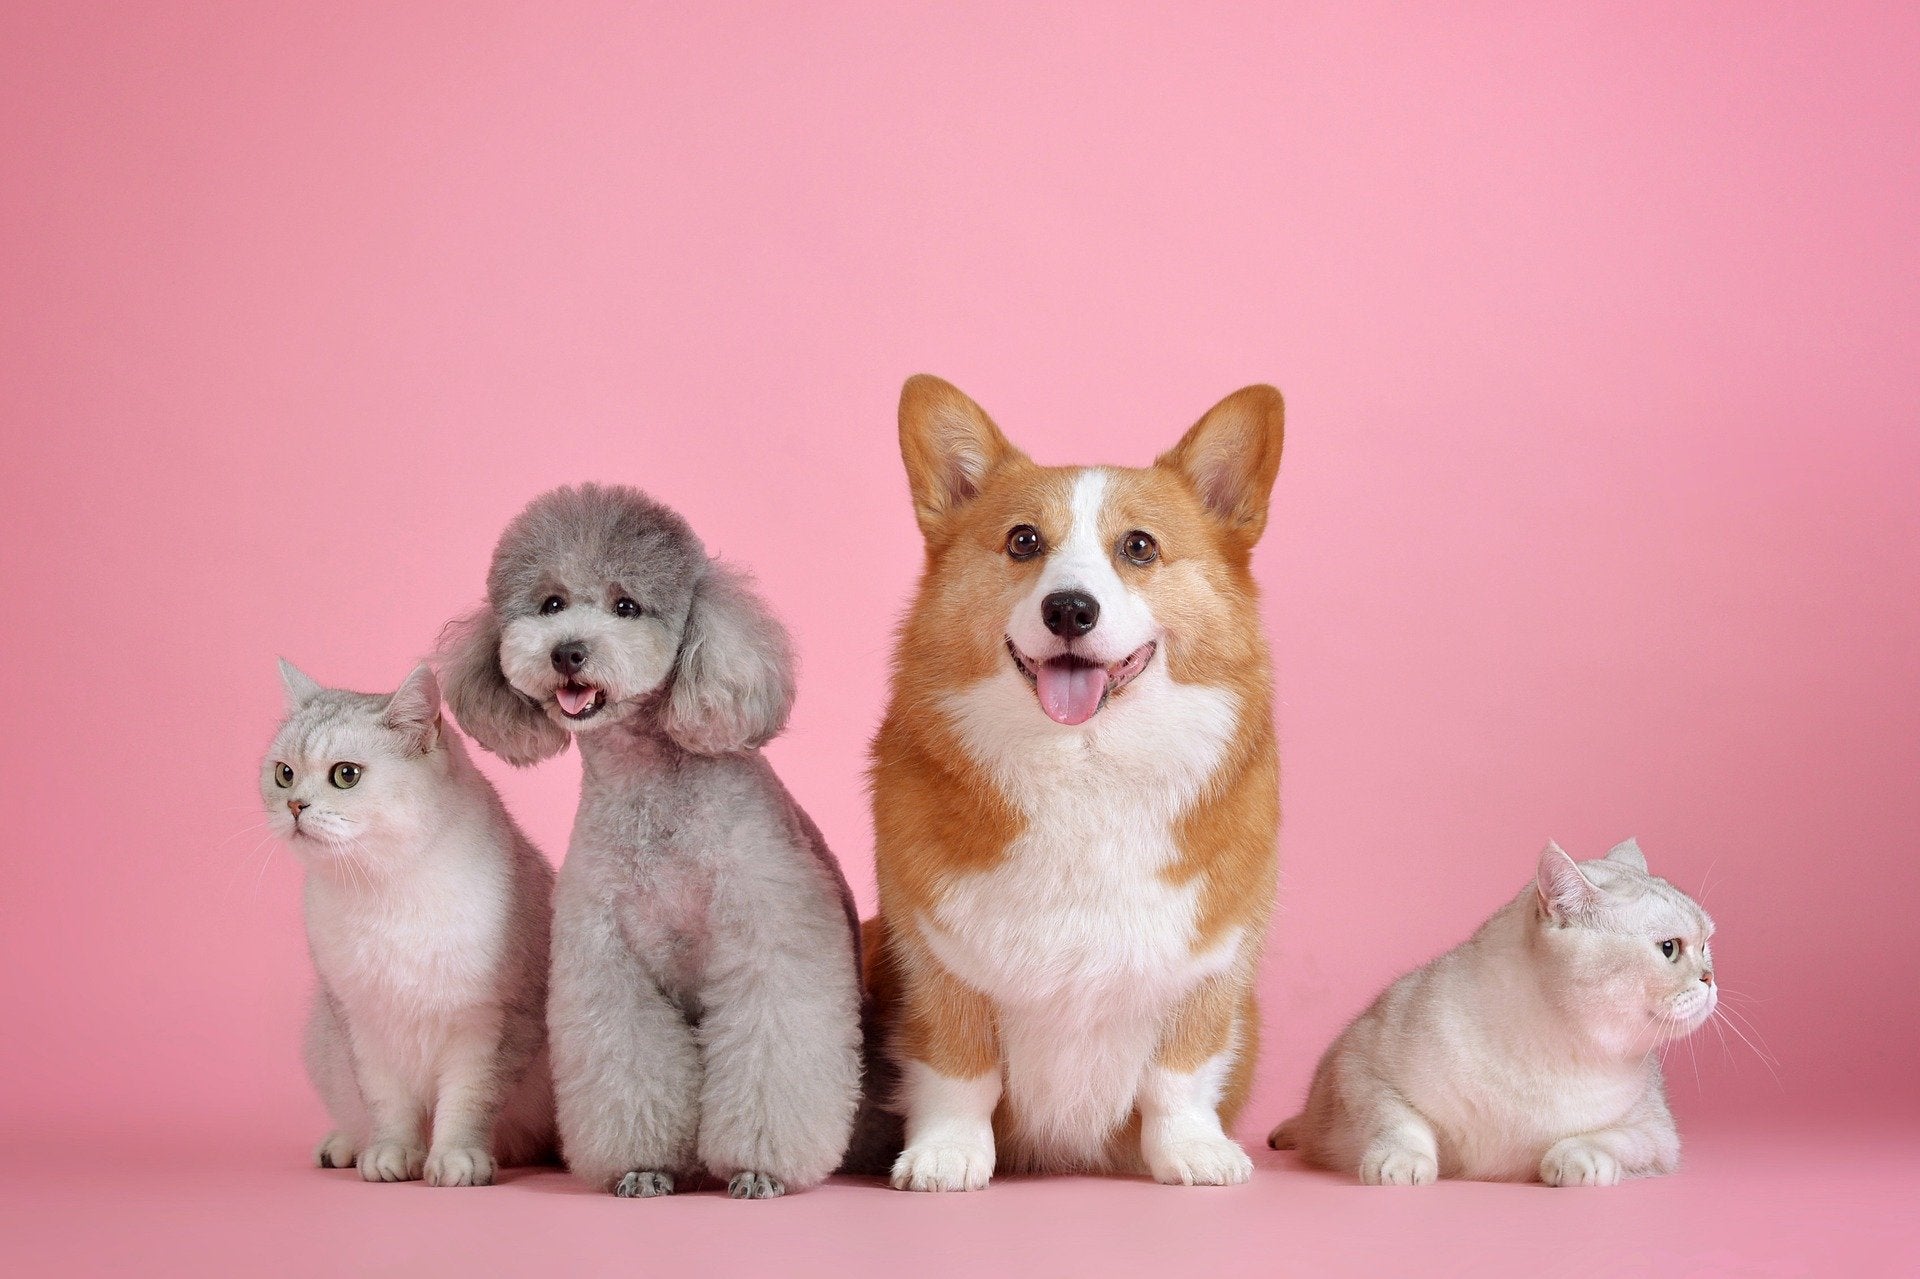 Four dogs freshly groomed in front of a pink background